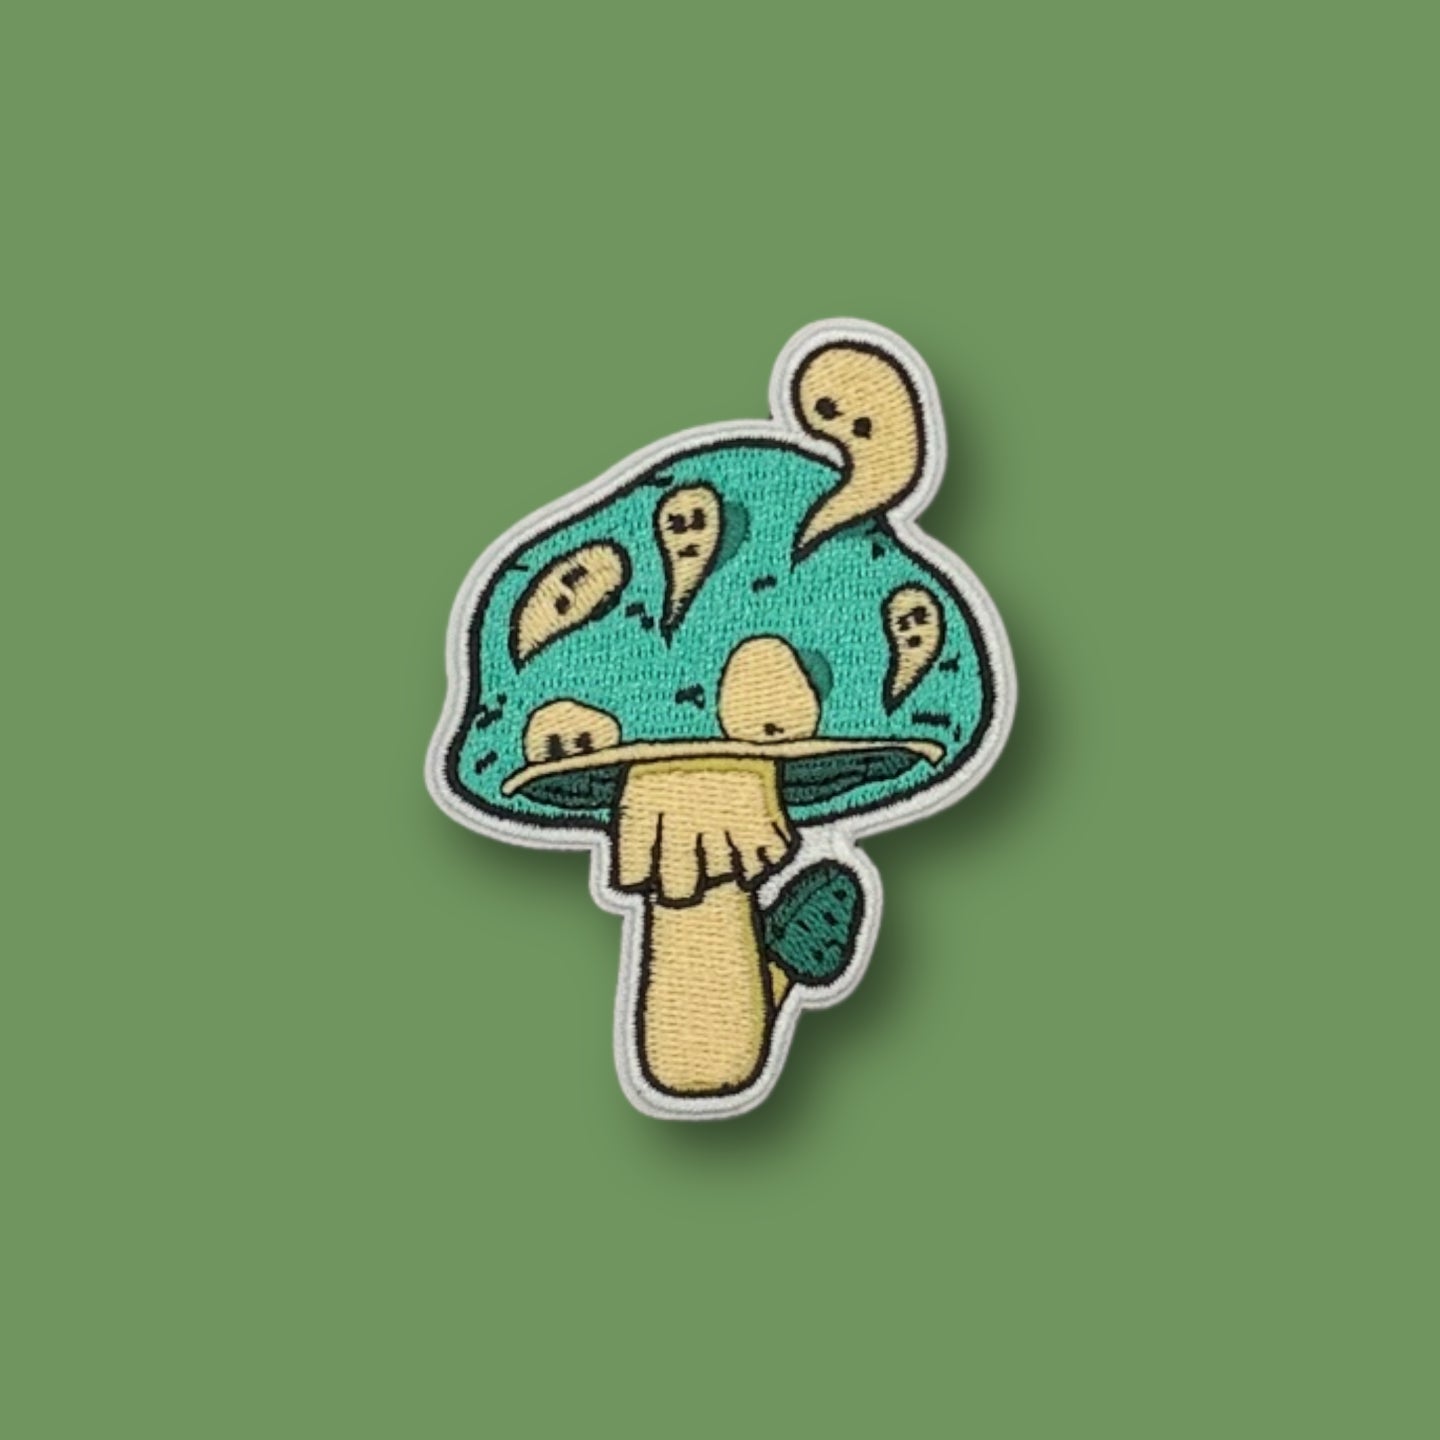 Ghostly Shrooms Patch